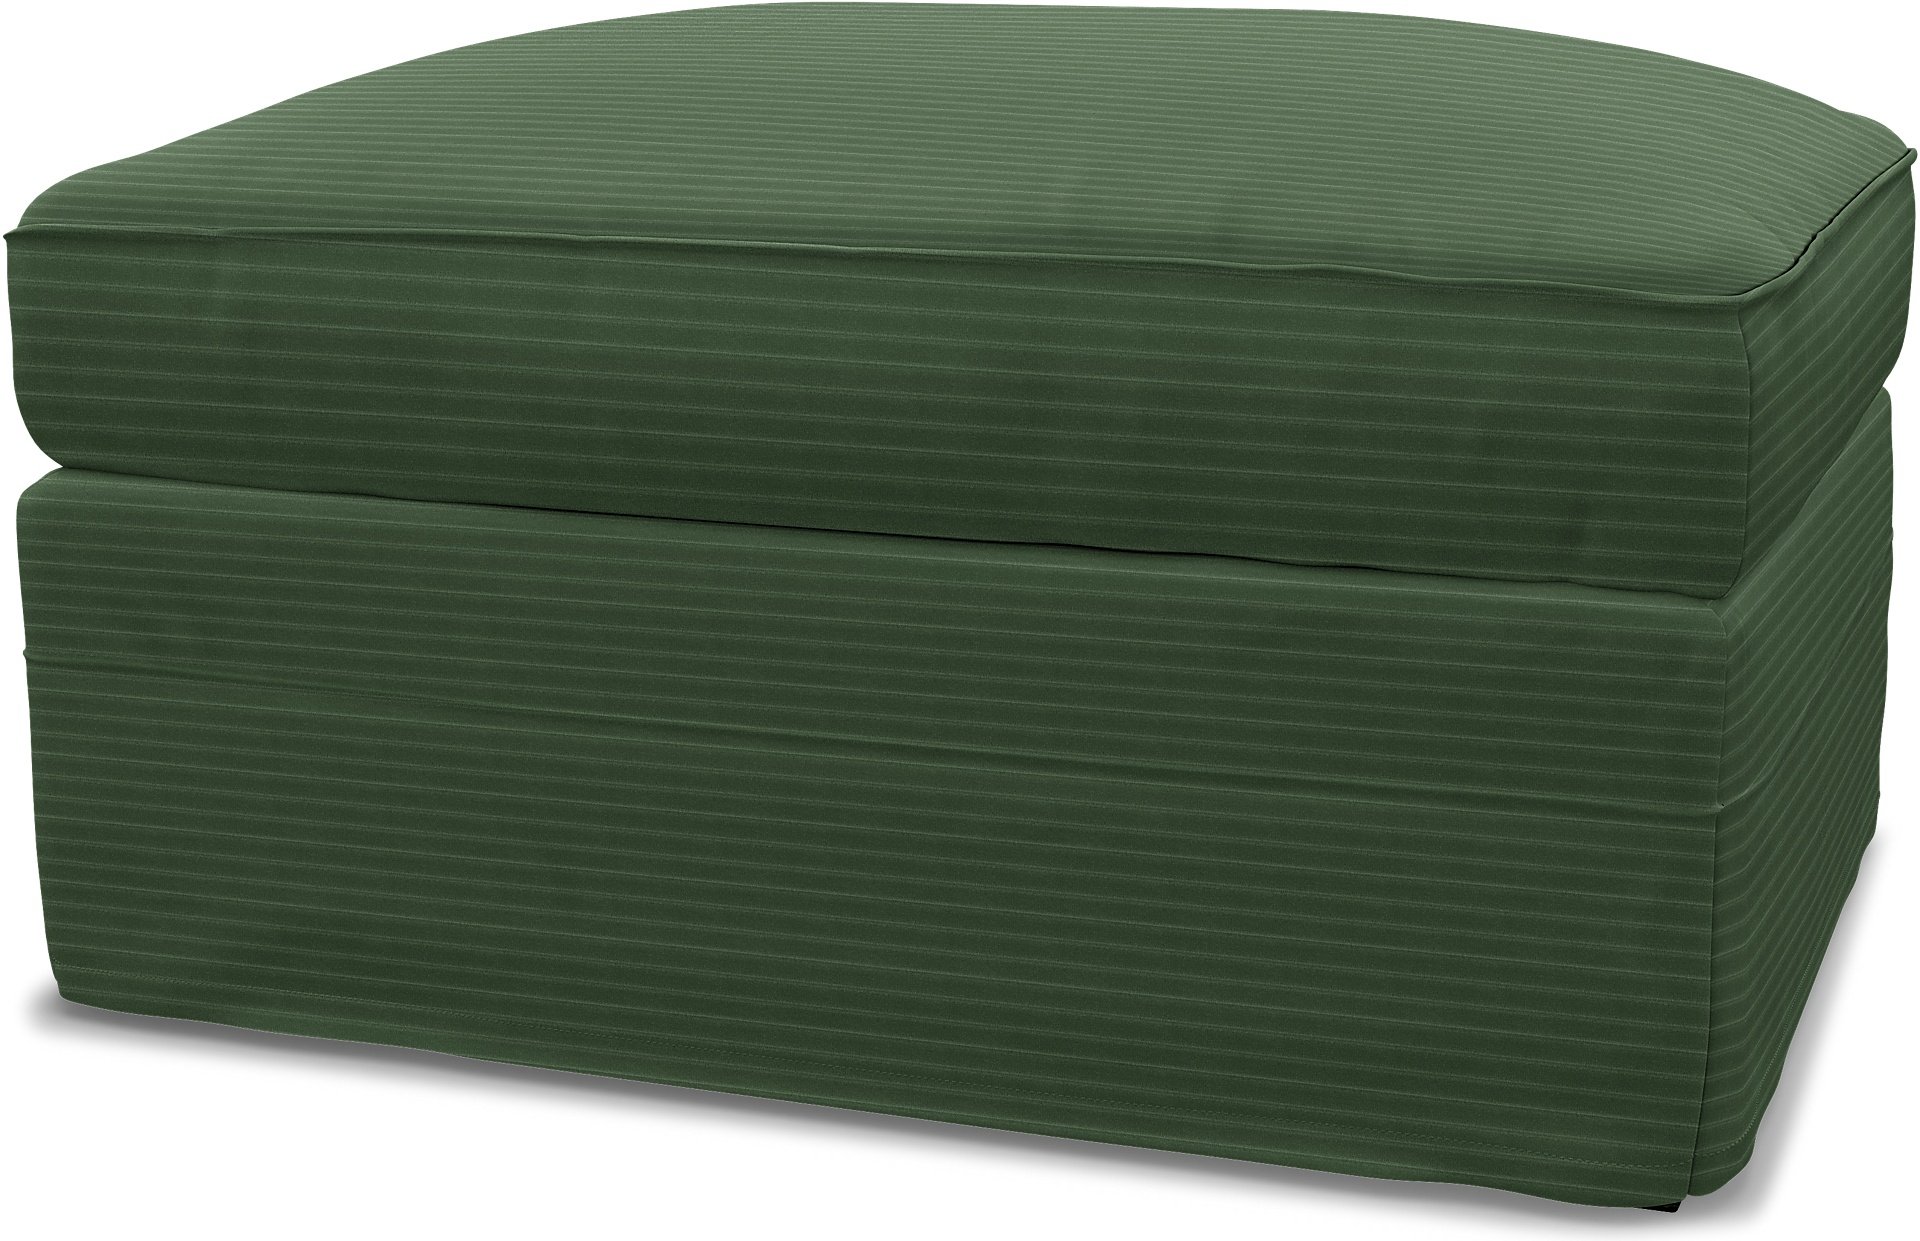 IKEA - Gronlid Footstool with Storage Cover, Palm Green, Corduroy - Bemz